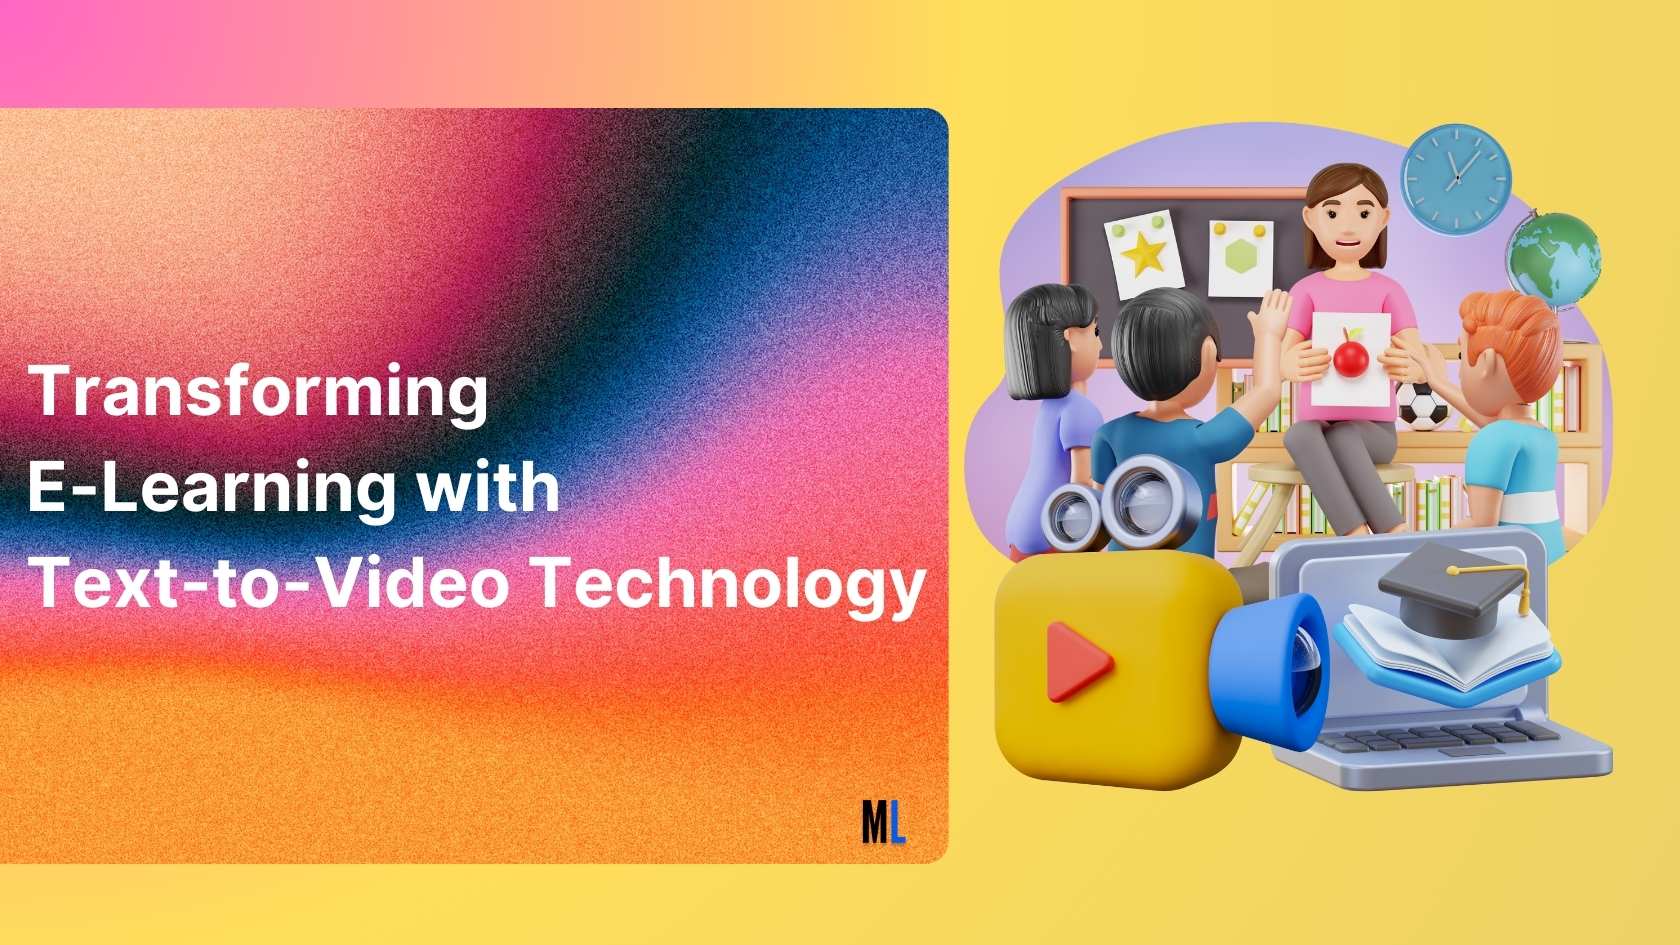 Transforming E-Learning with Text-to-Video Technology